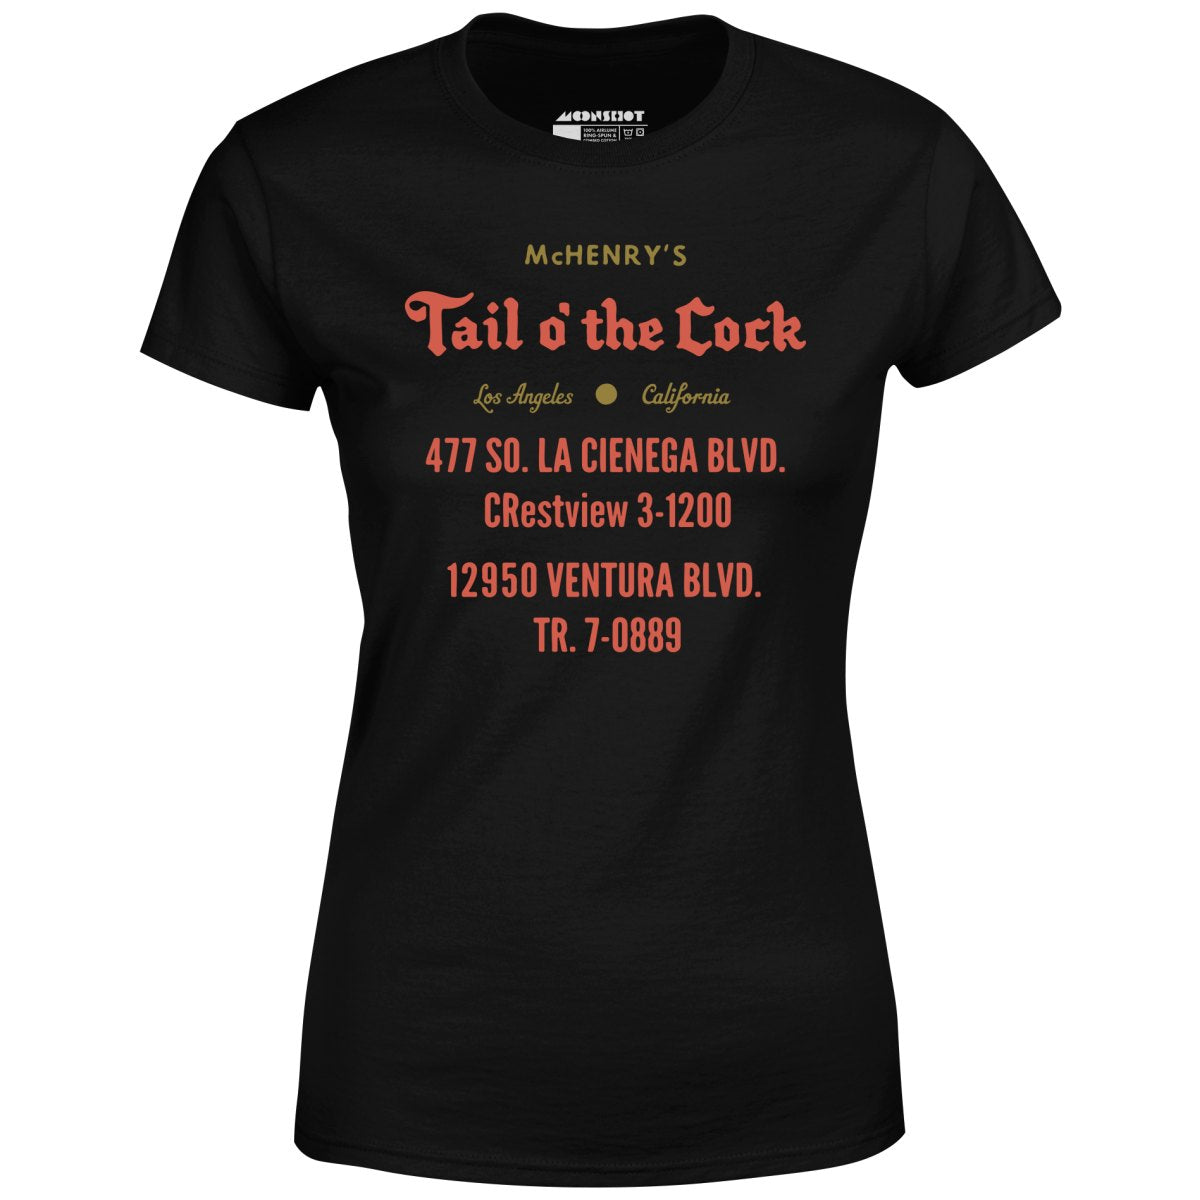 McHenry's Tail o' the Cock - Los Angeles, CA - Vintage Restaurant - Women's T-Shirt